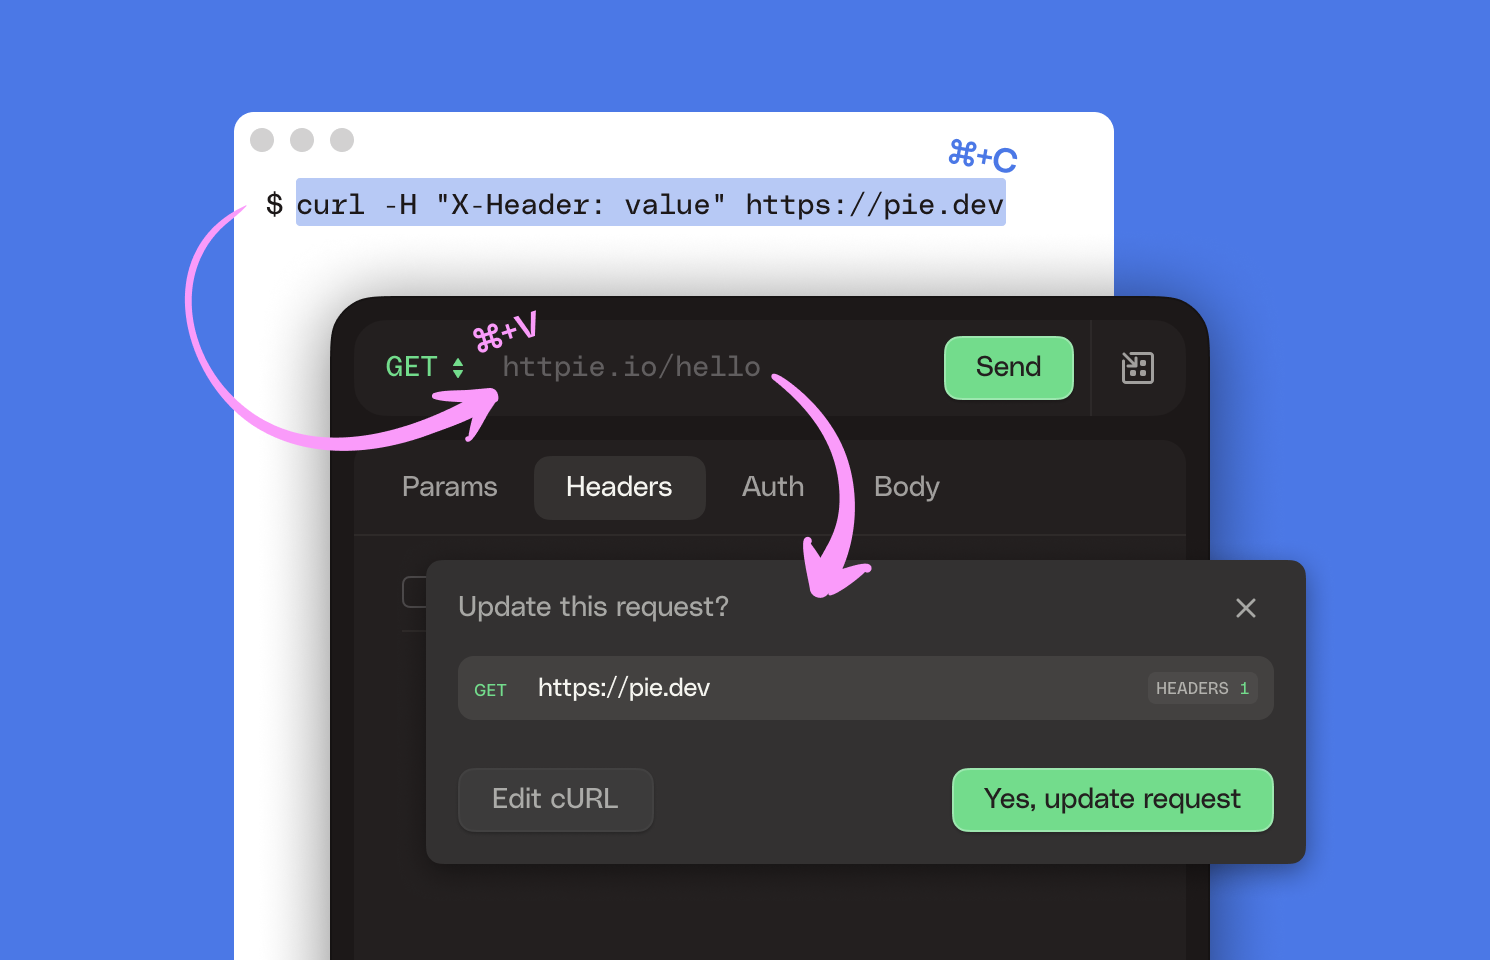 Import cURL command into HTTPie simply by pasting it into the URL bar